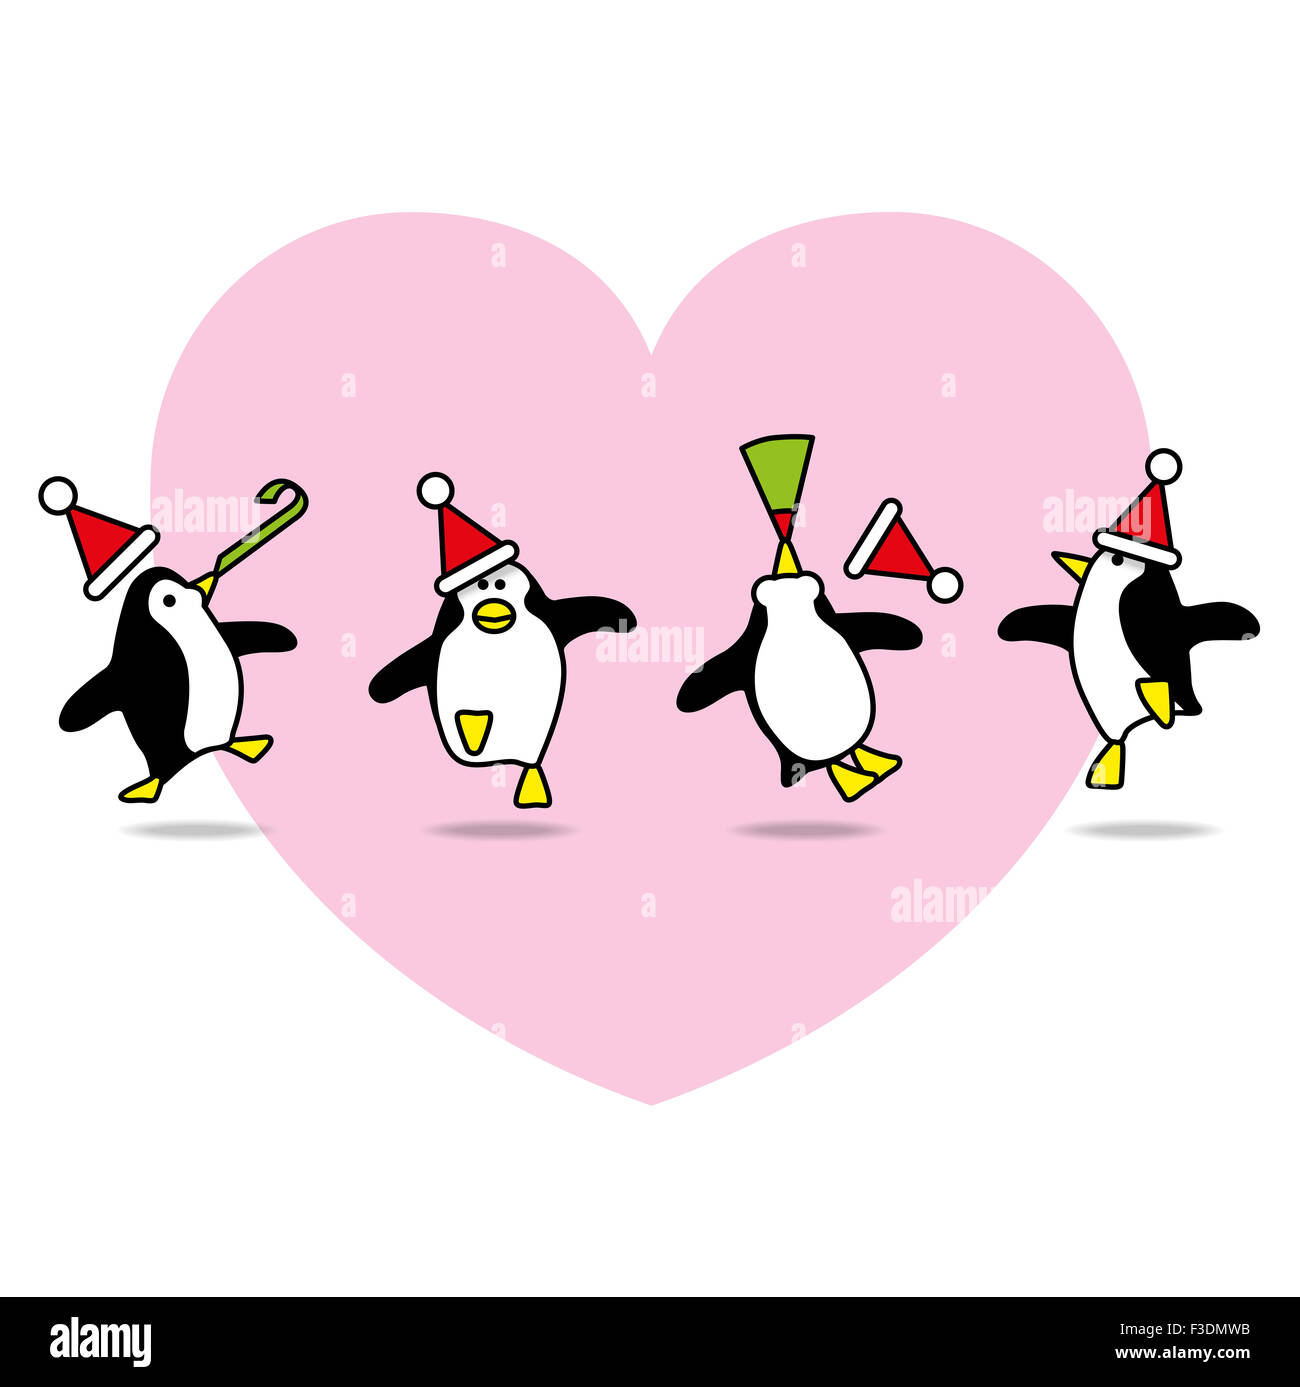 Four Happy Penguins wearing Santa Hats Dancing On Pink Heart background Stock Photo